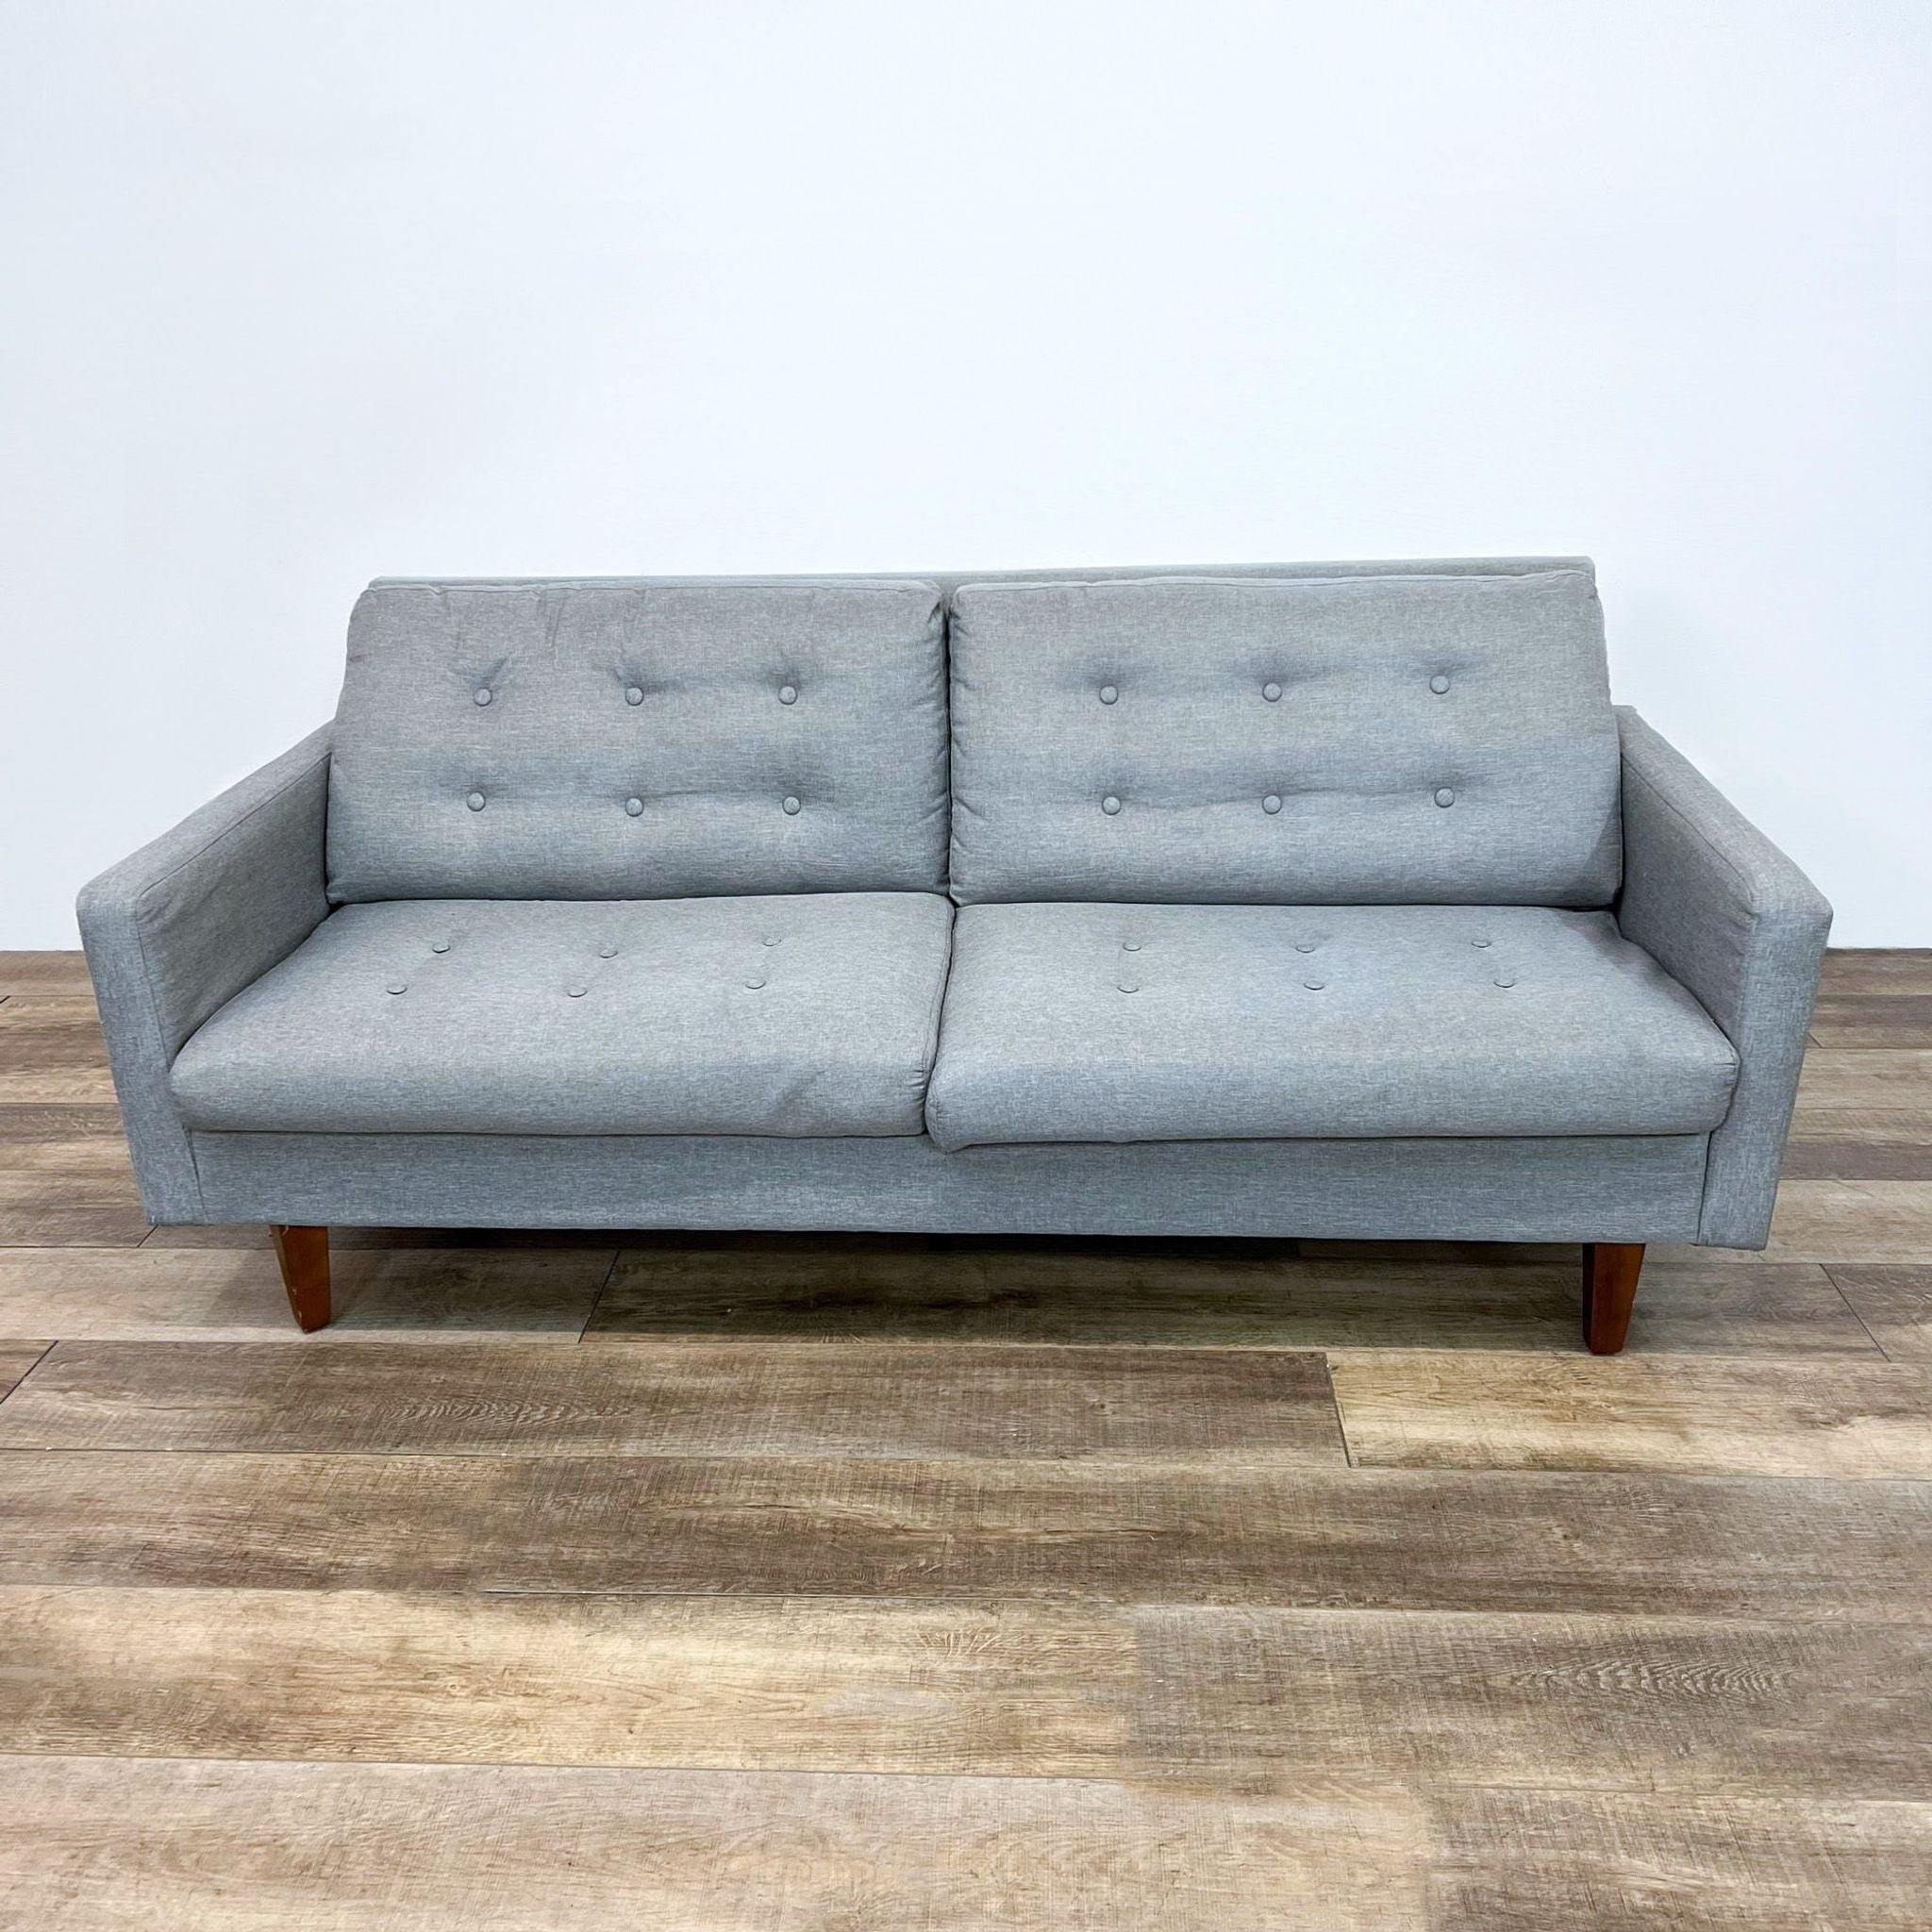 Aeon Furniture 3-seat compact gray tufted sofa with narrow arms and tapered wooden feet on a wood-floor background.